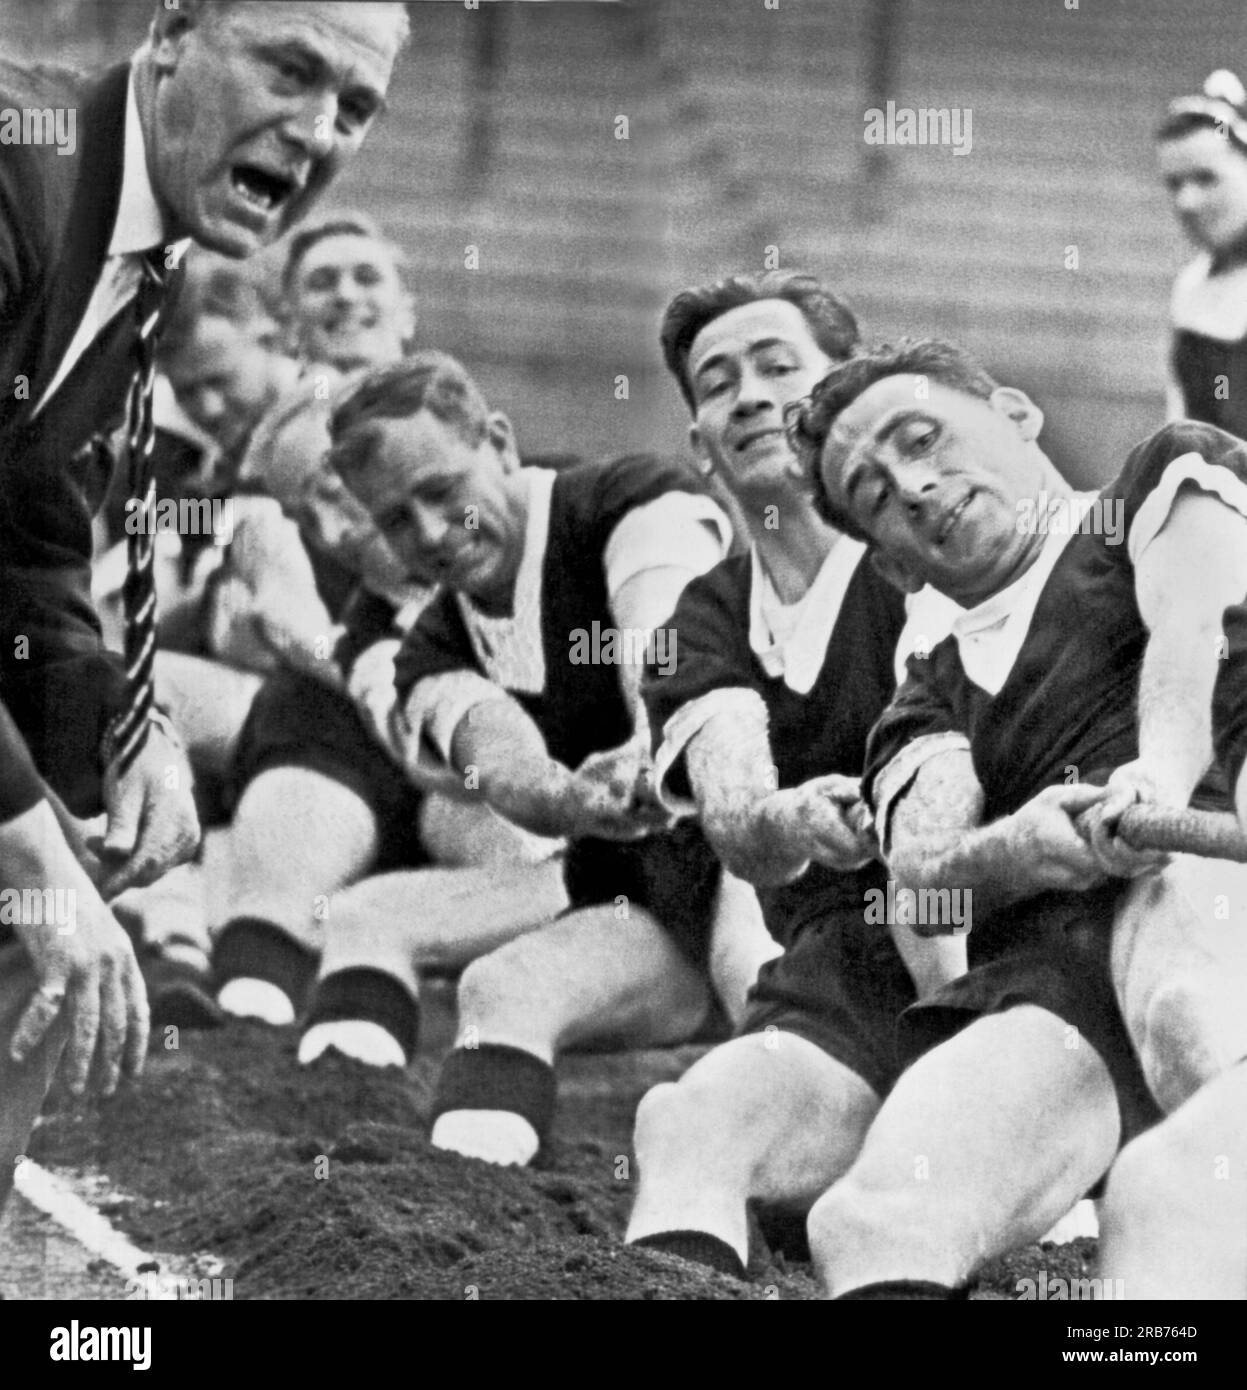 Stockholm, Sweden:  August, 1961 The British tug of war team strains as their coach yells encouragement against the Swedish team in Stockholm Stadium in the first tug of war in Sweden since 1913. The British team lost, 9-3. Stock Photo